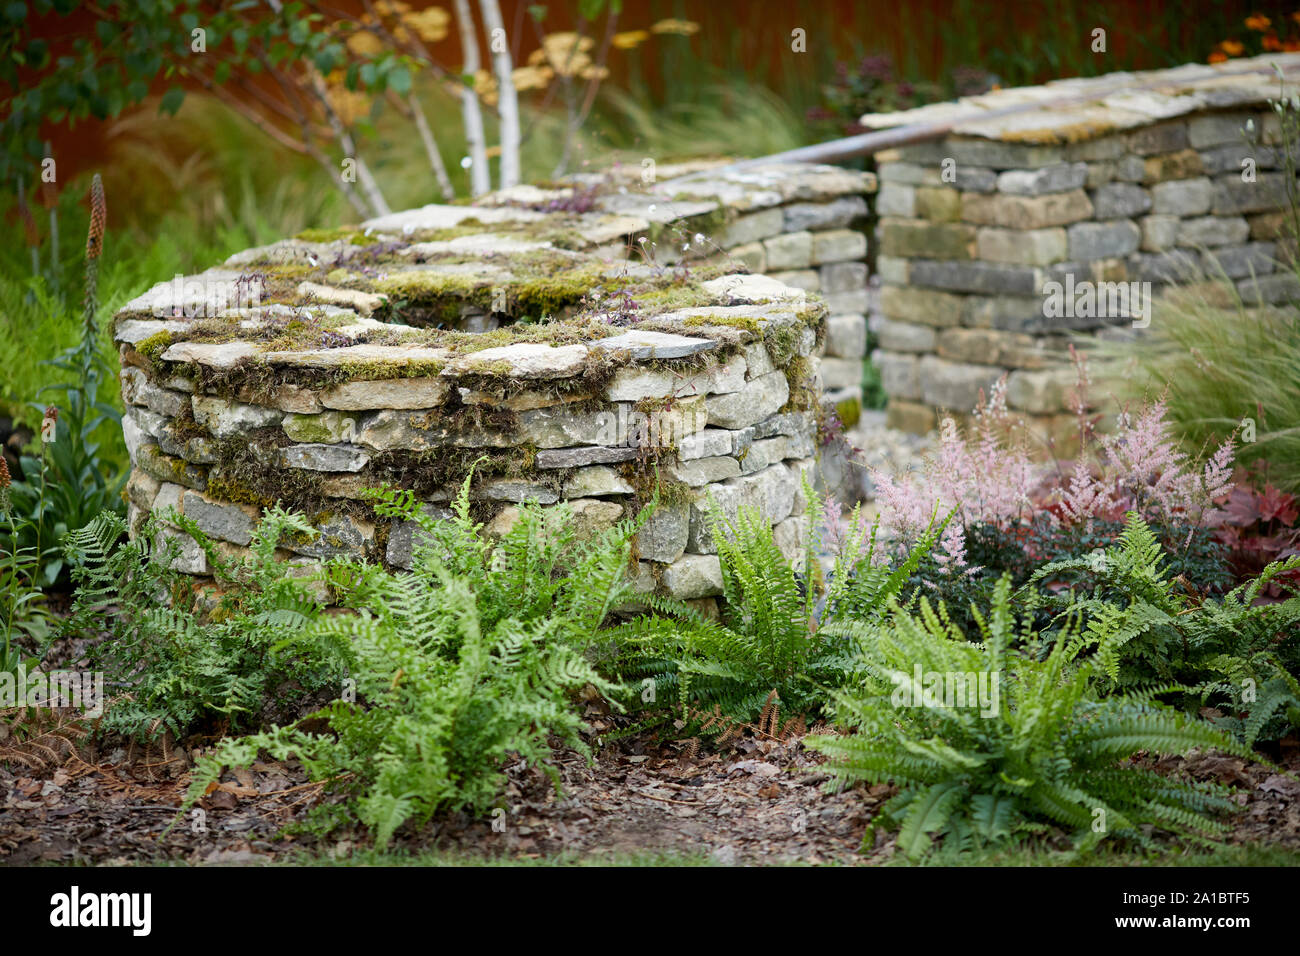 Attractive dry stone wall with moss in ornate shape Stock Photo